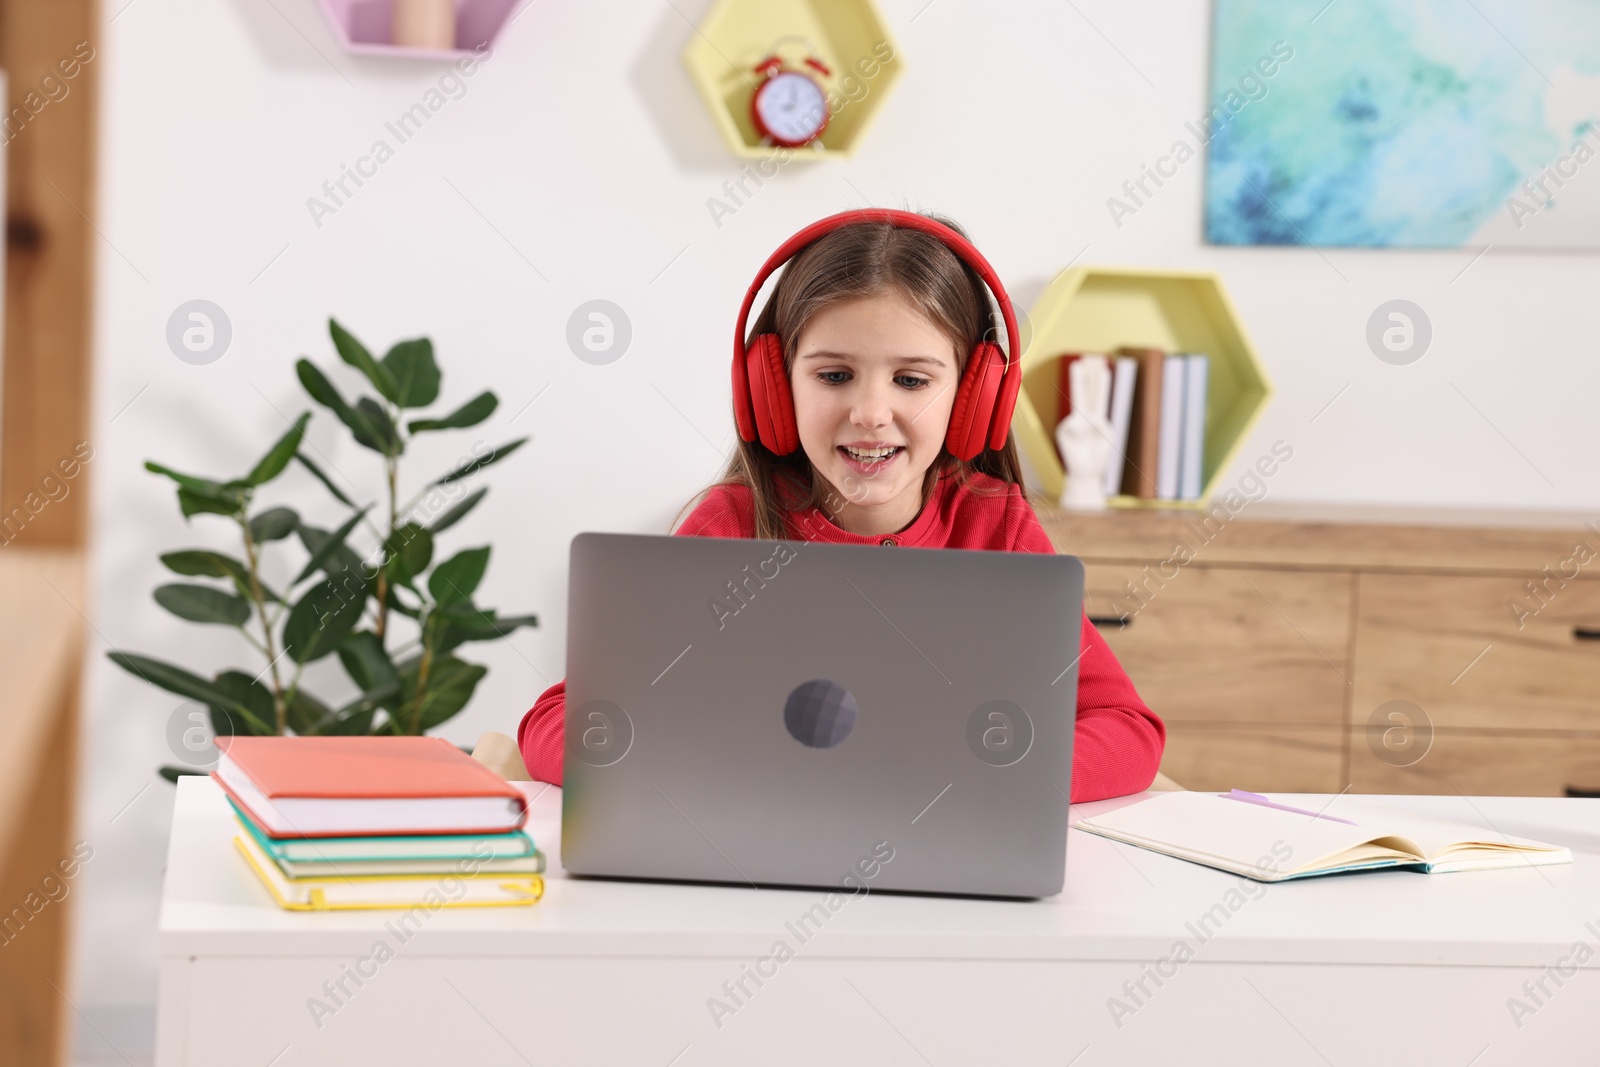 Photo of E-learning. Cute girl using laptop and headphones during online lesson at table indoors